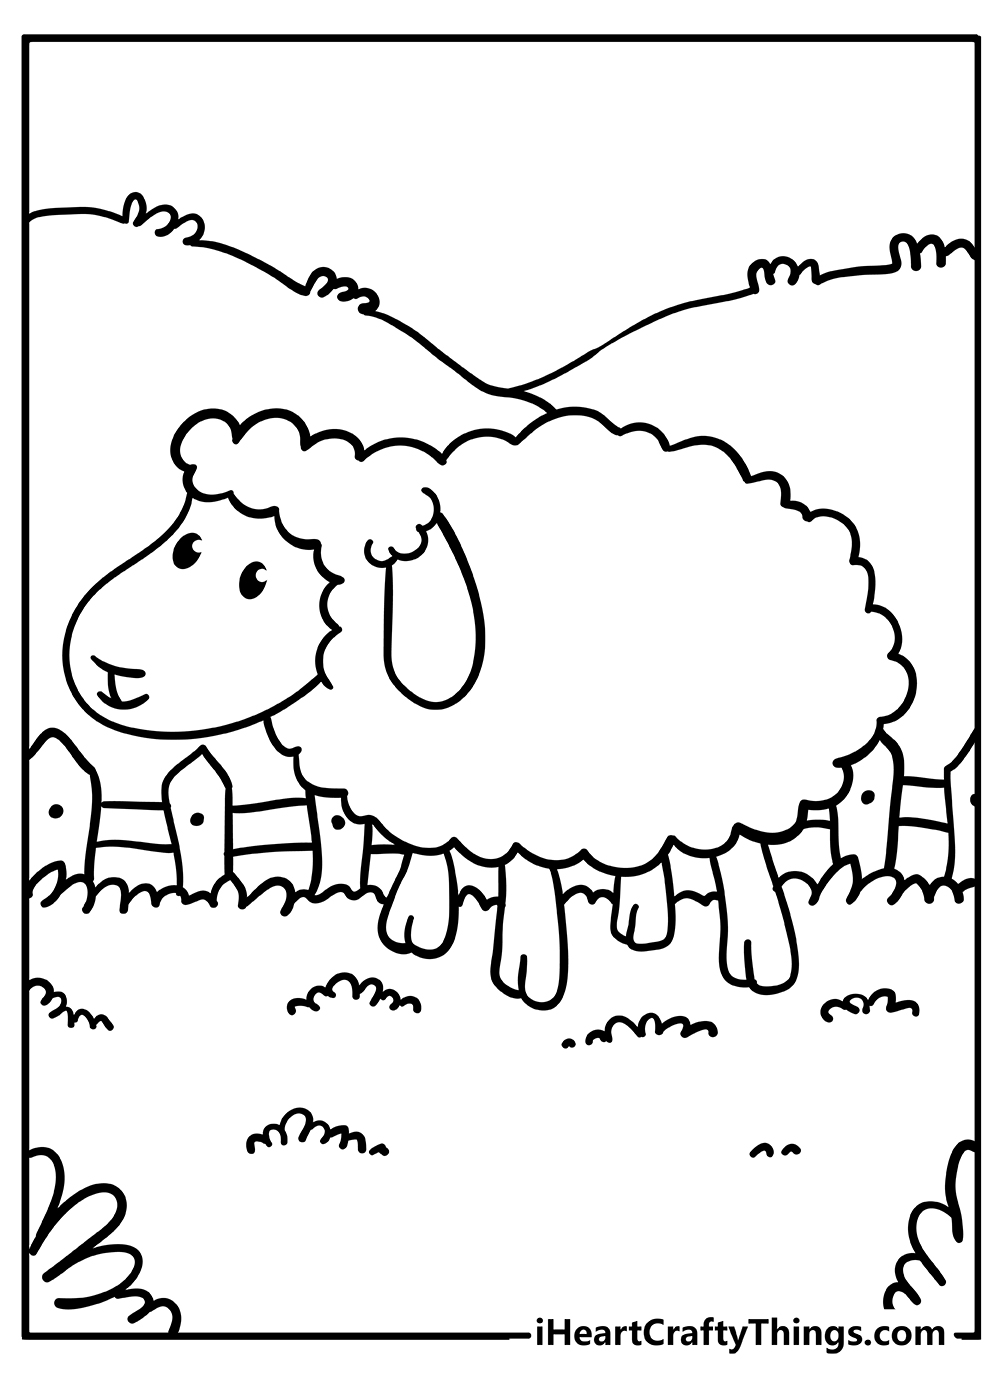 Farm Animal Coloring Book for adults free download